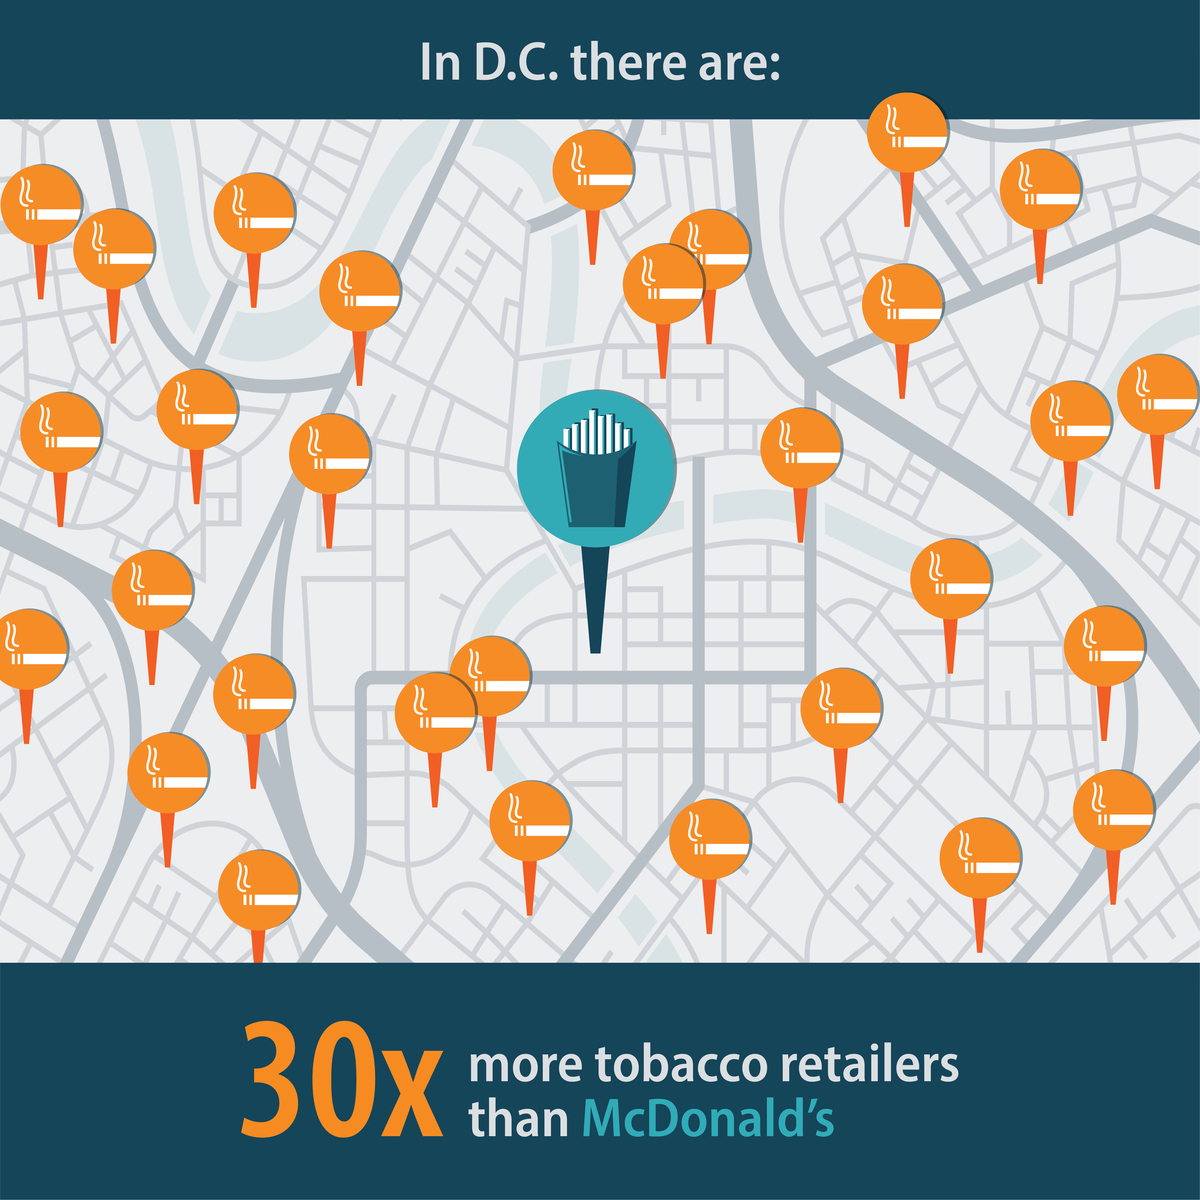 In D.C. there are: 30 times more tobacco retailers than McDonald's